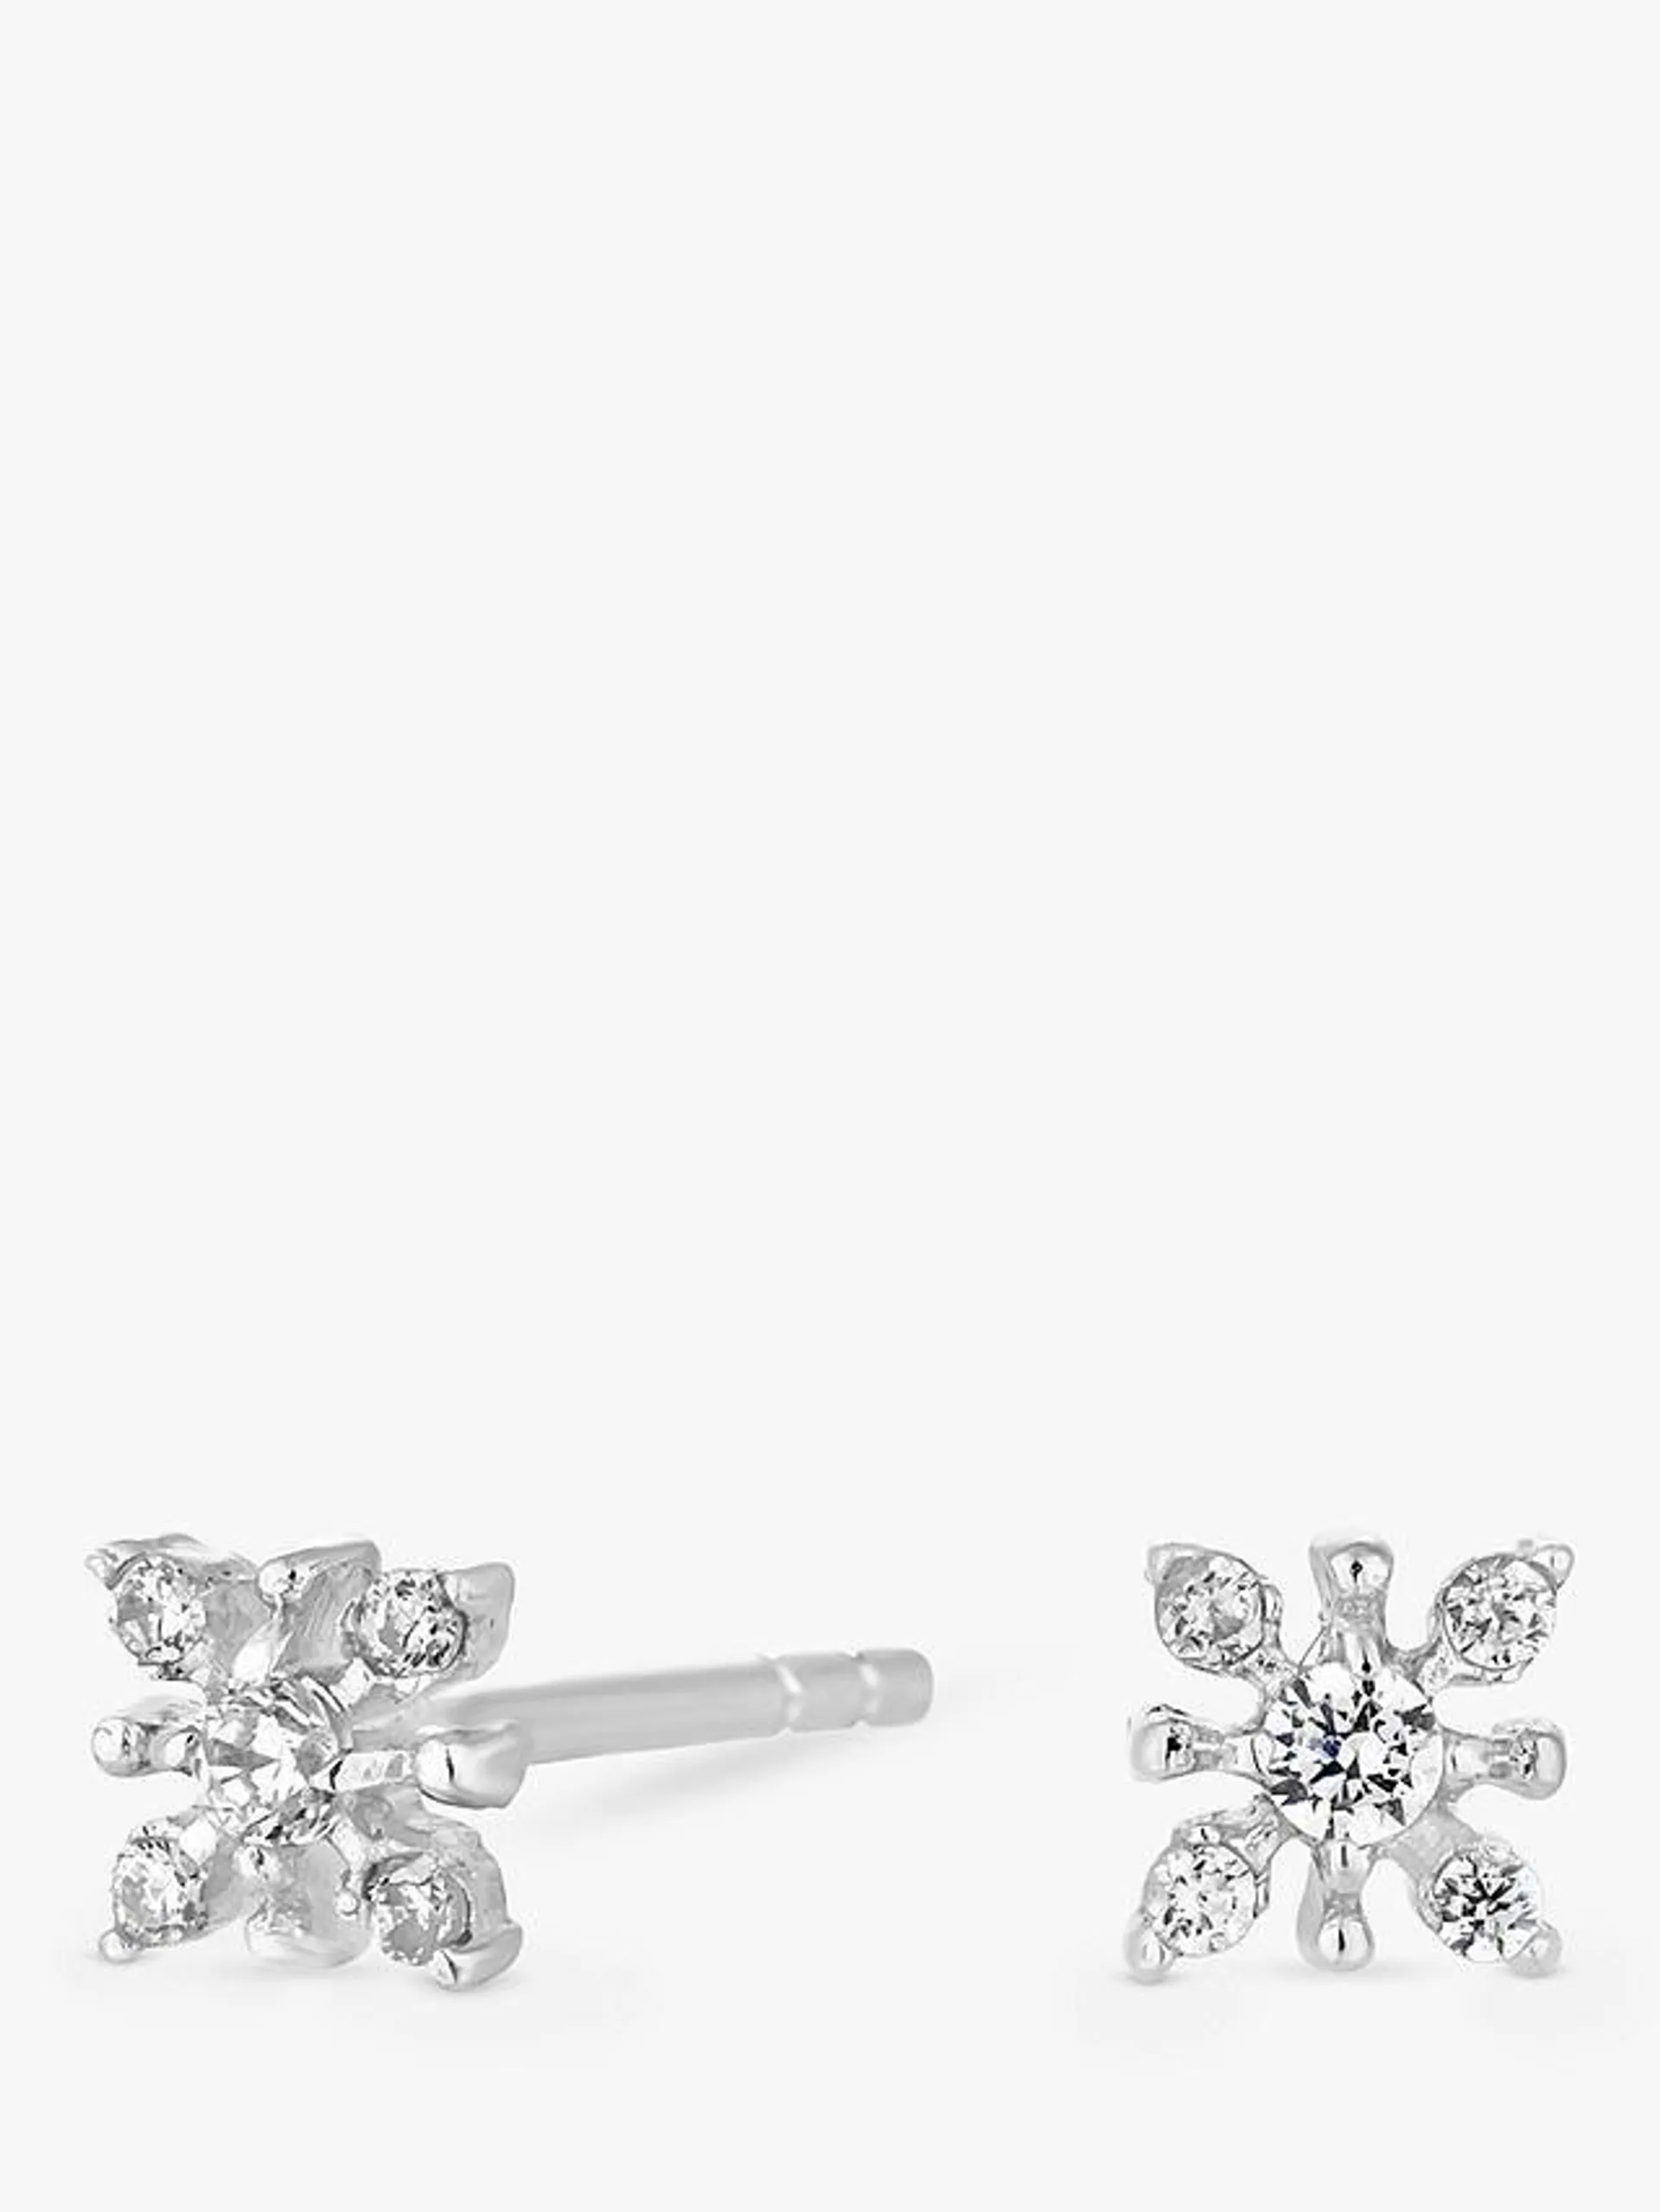 Simply Silver Mini Floral Cubic Zirconia Stud Earrings, Silver